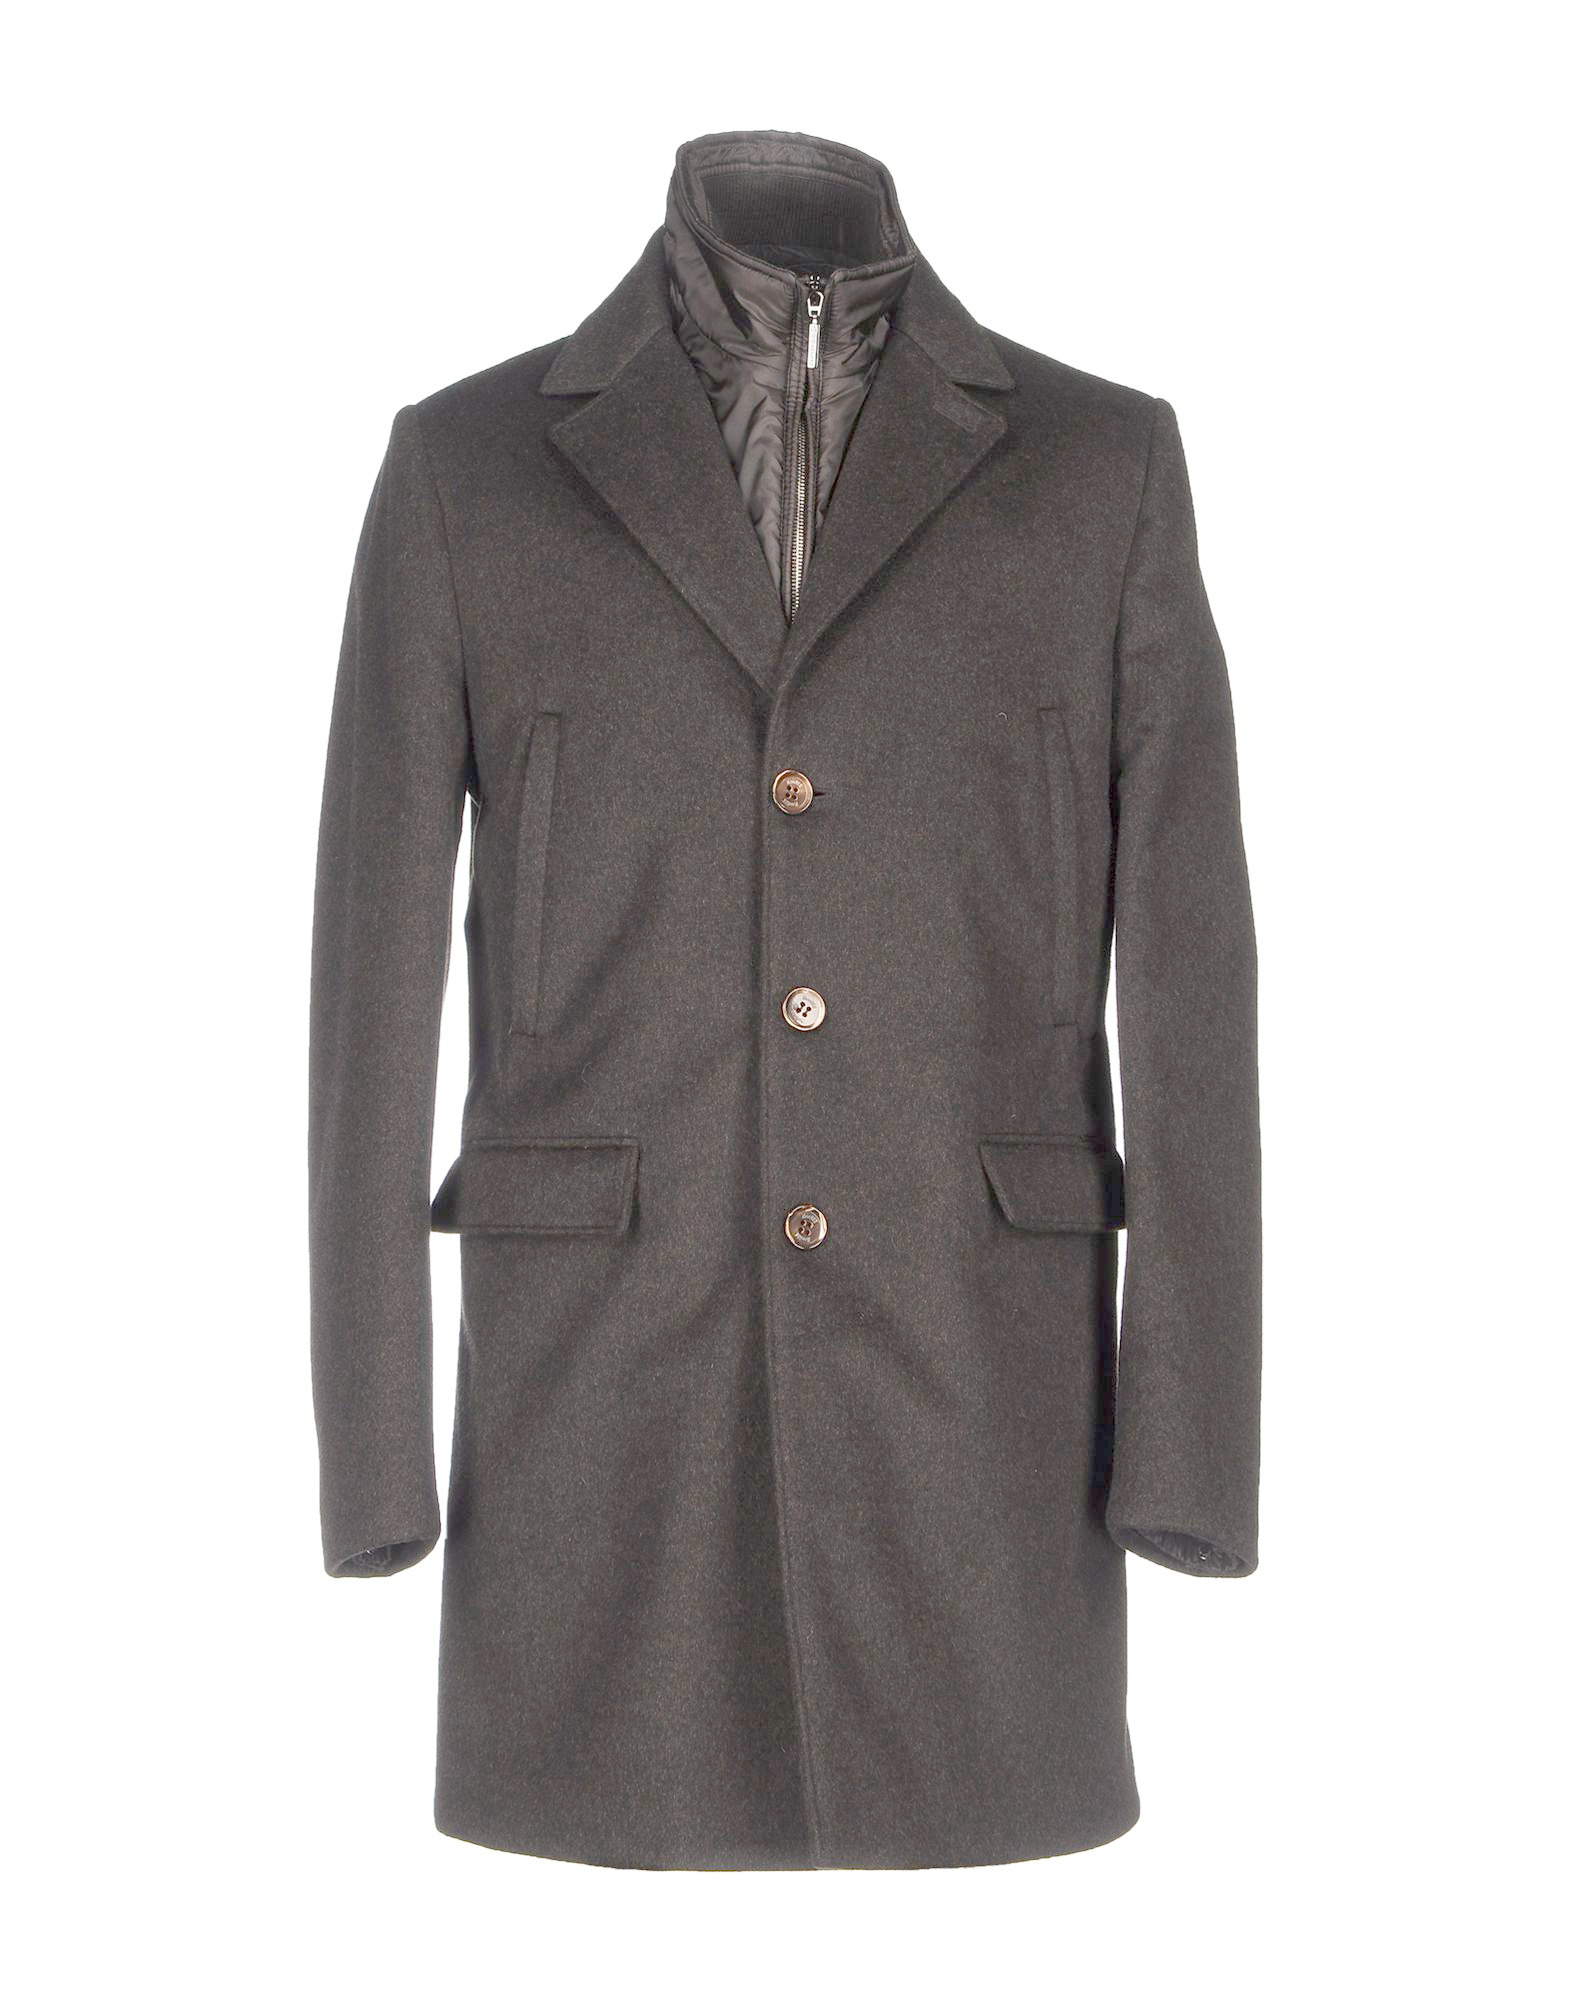 Moorer Cashmere Coat in Cocoa (Gray) for Men - Lyst